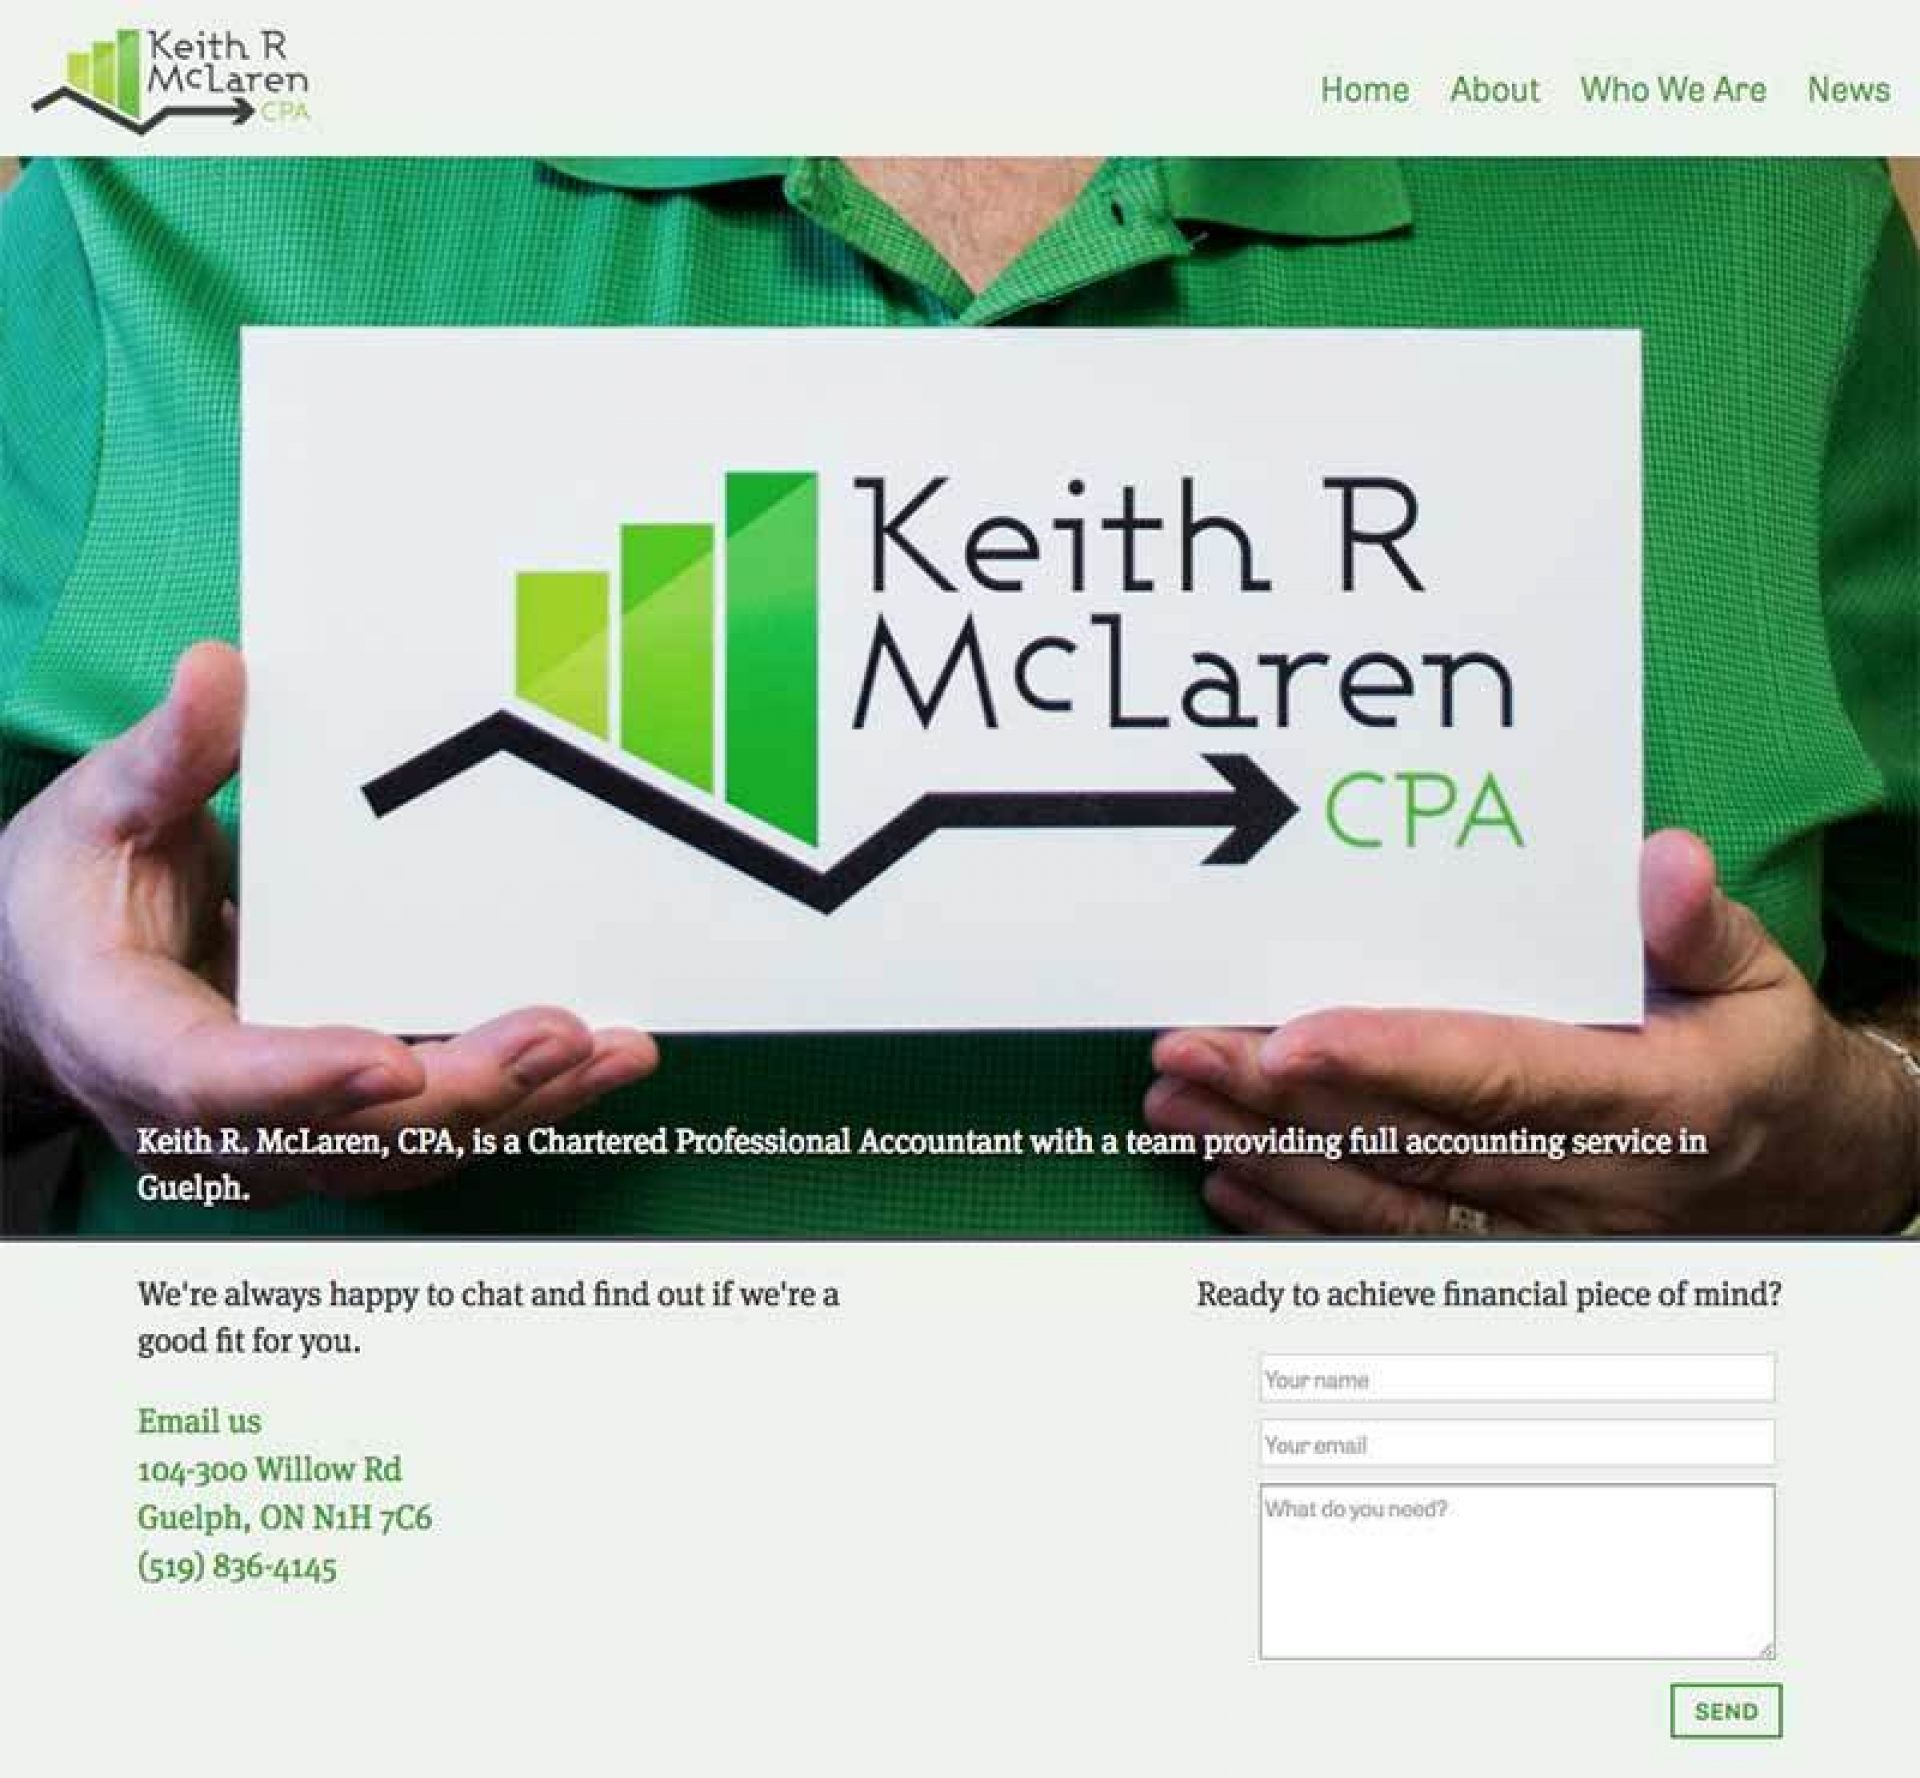 The new home page on Keith's website